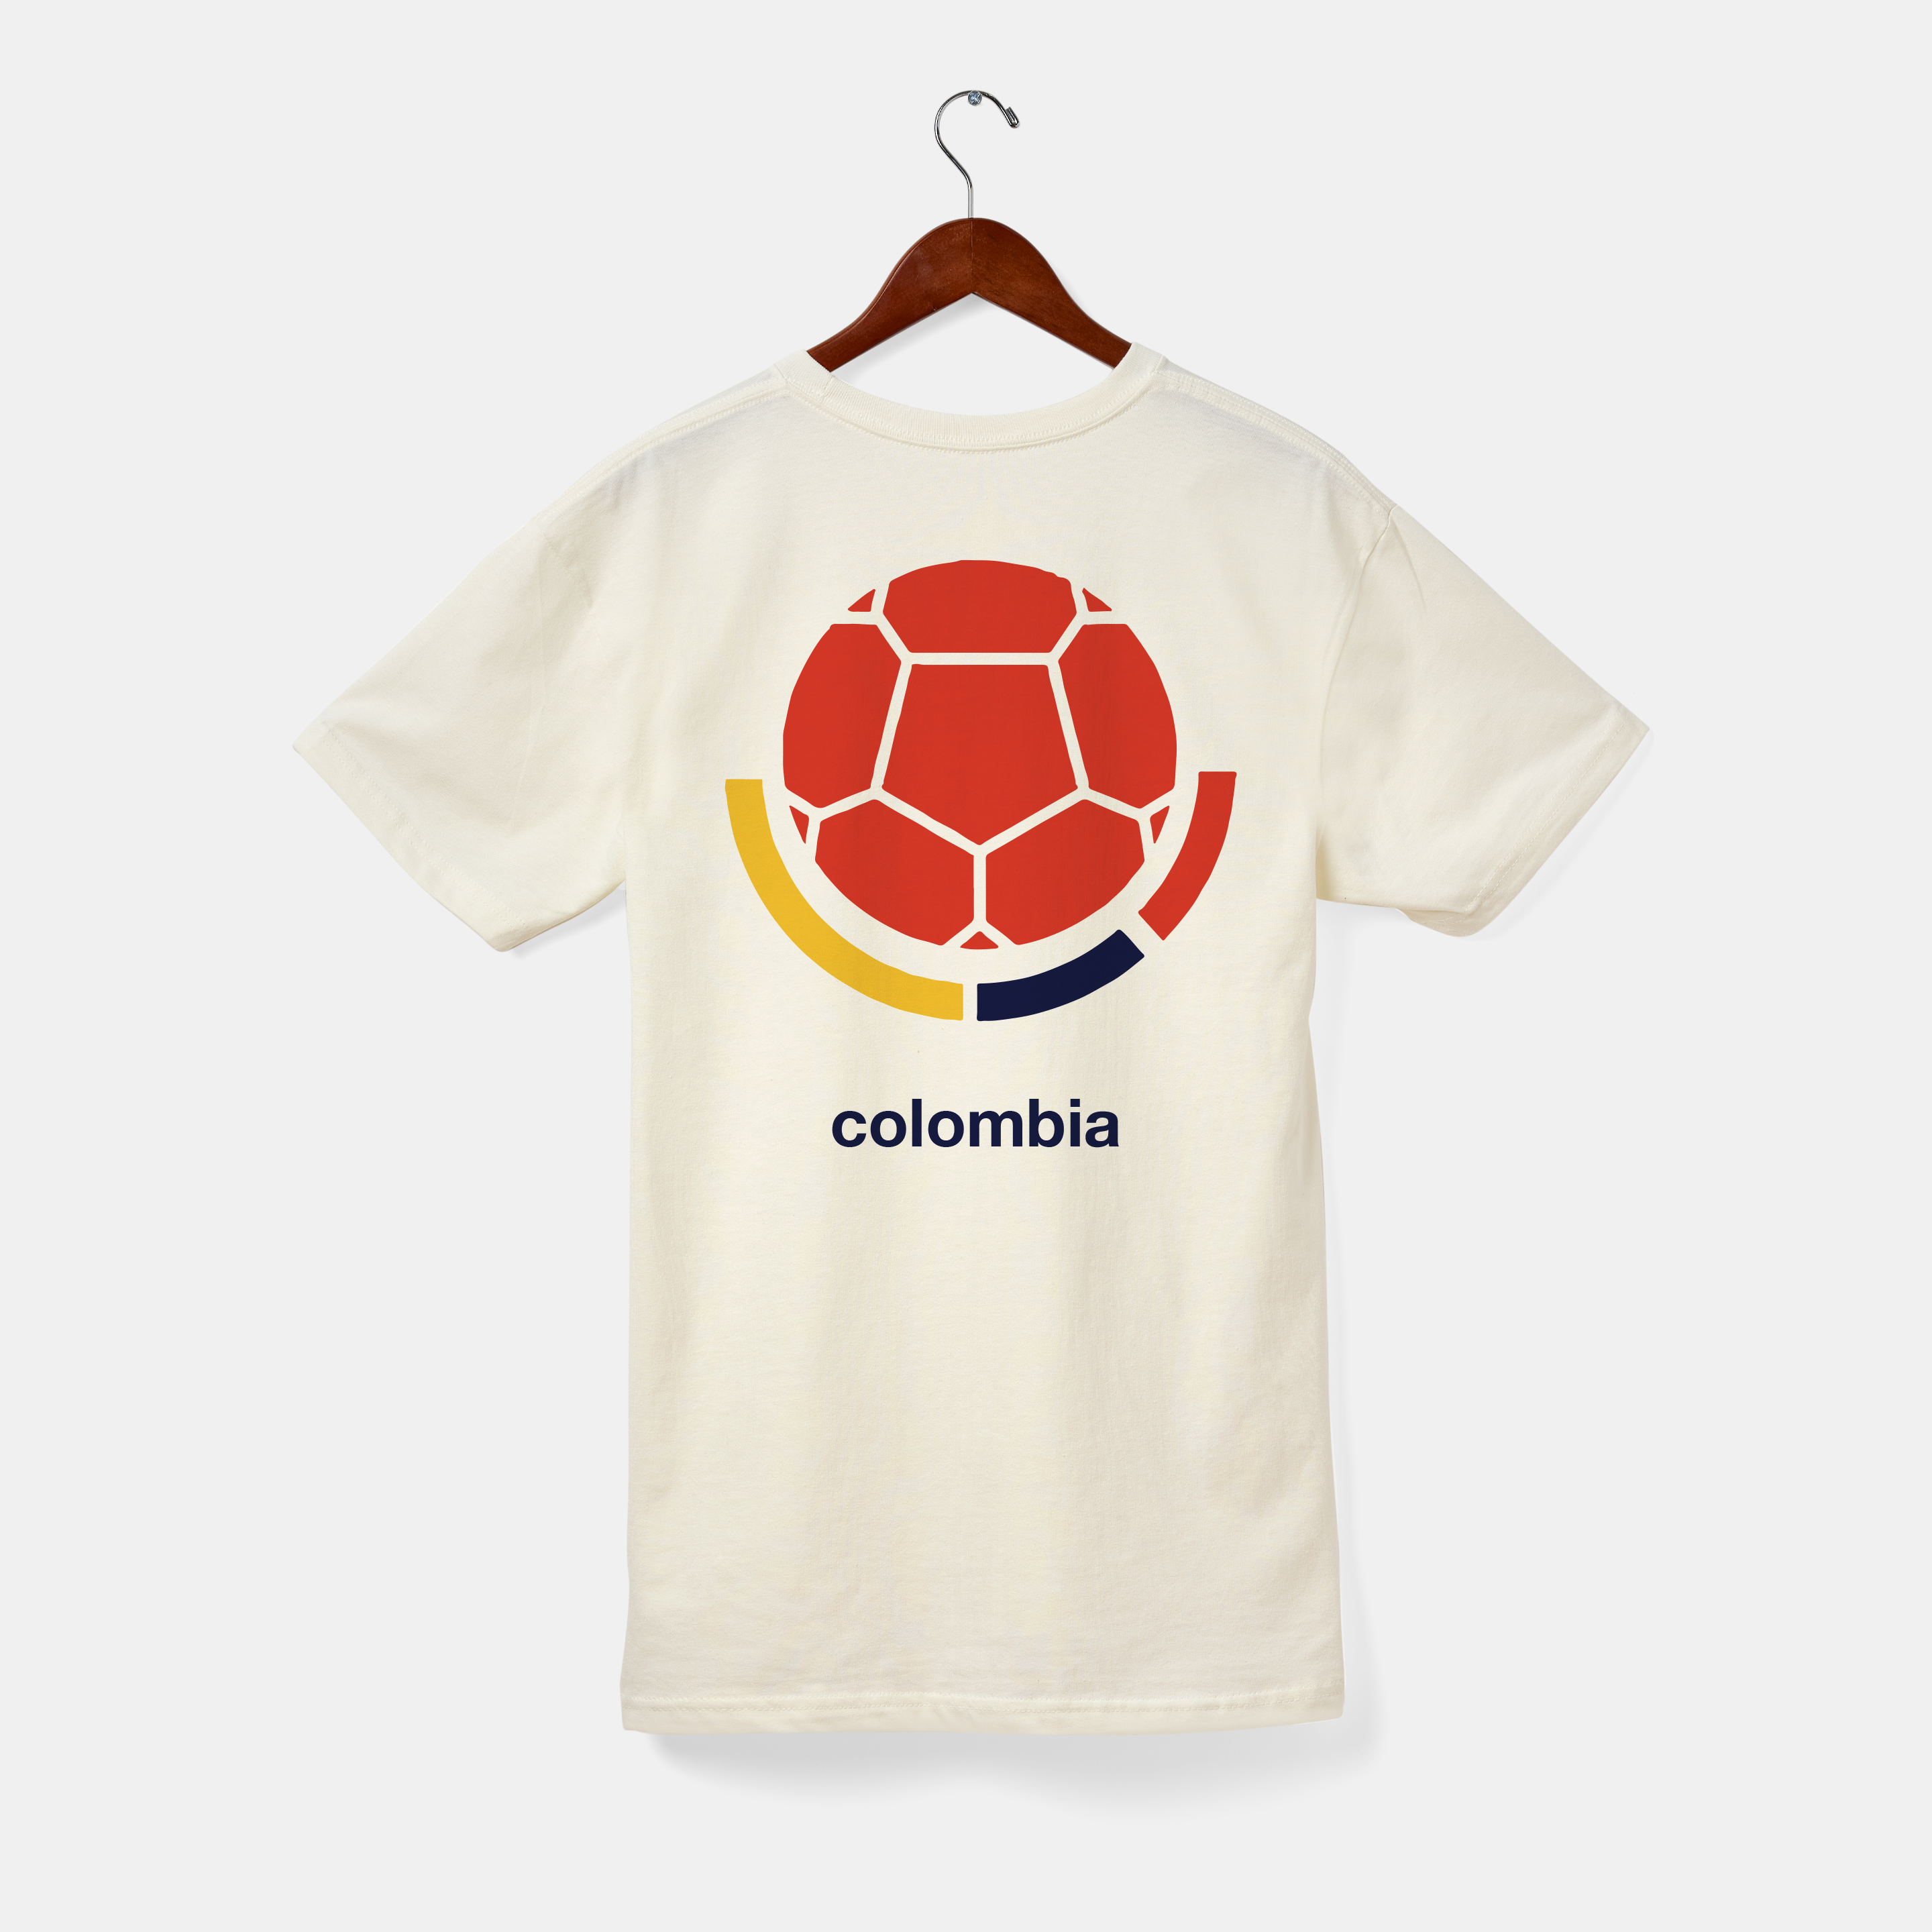 "Unofficial" Colombia Tee